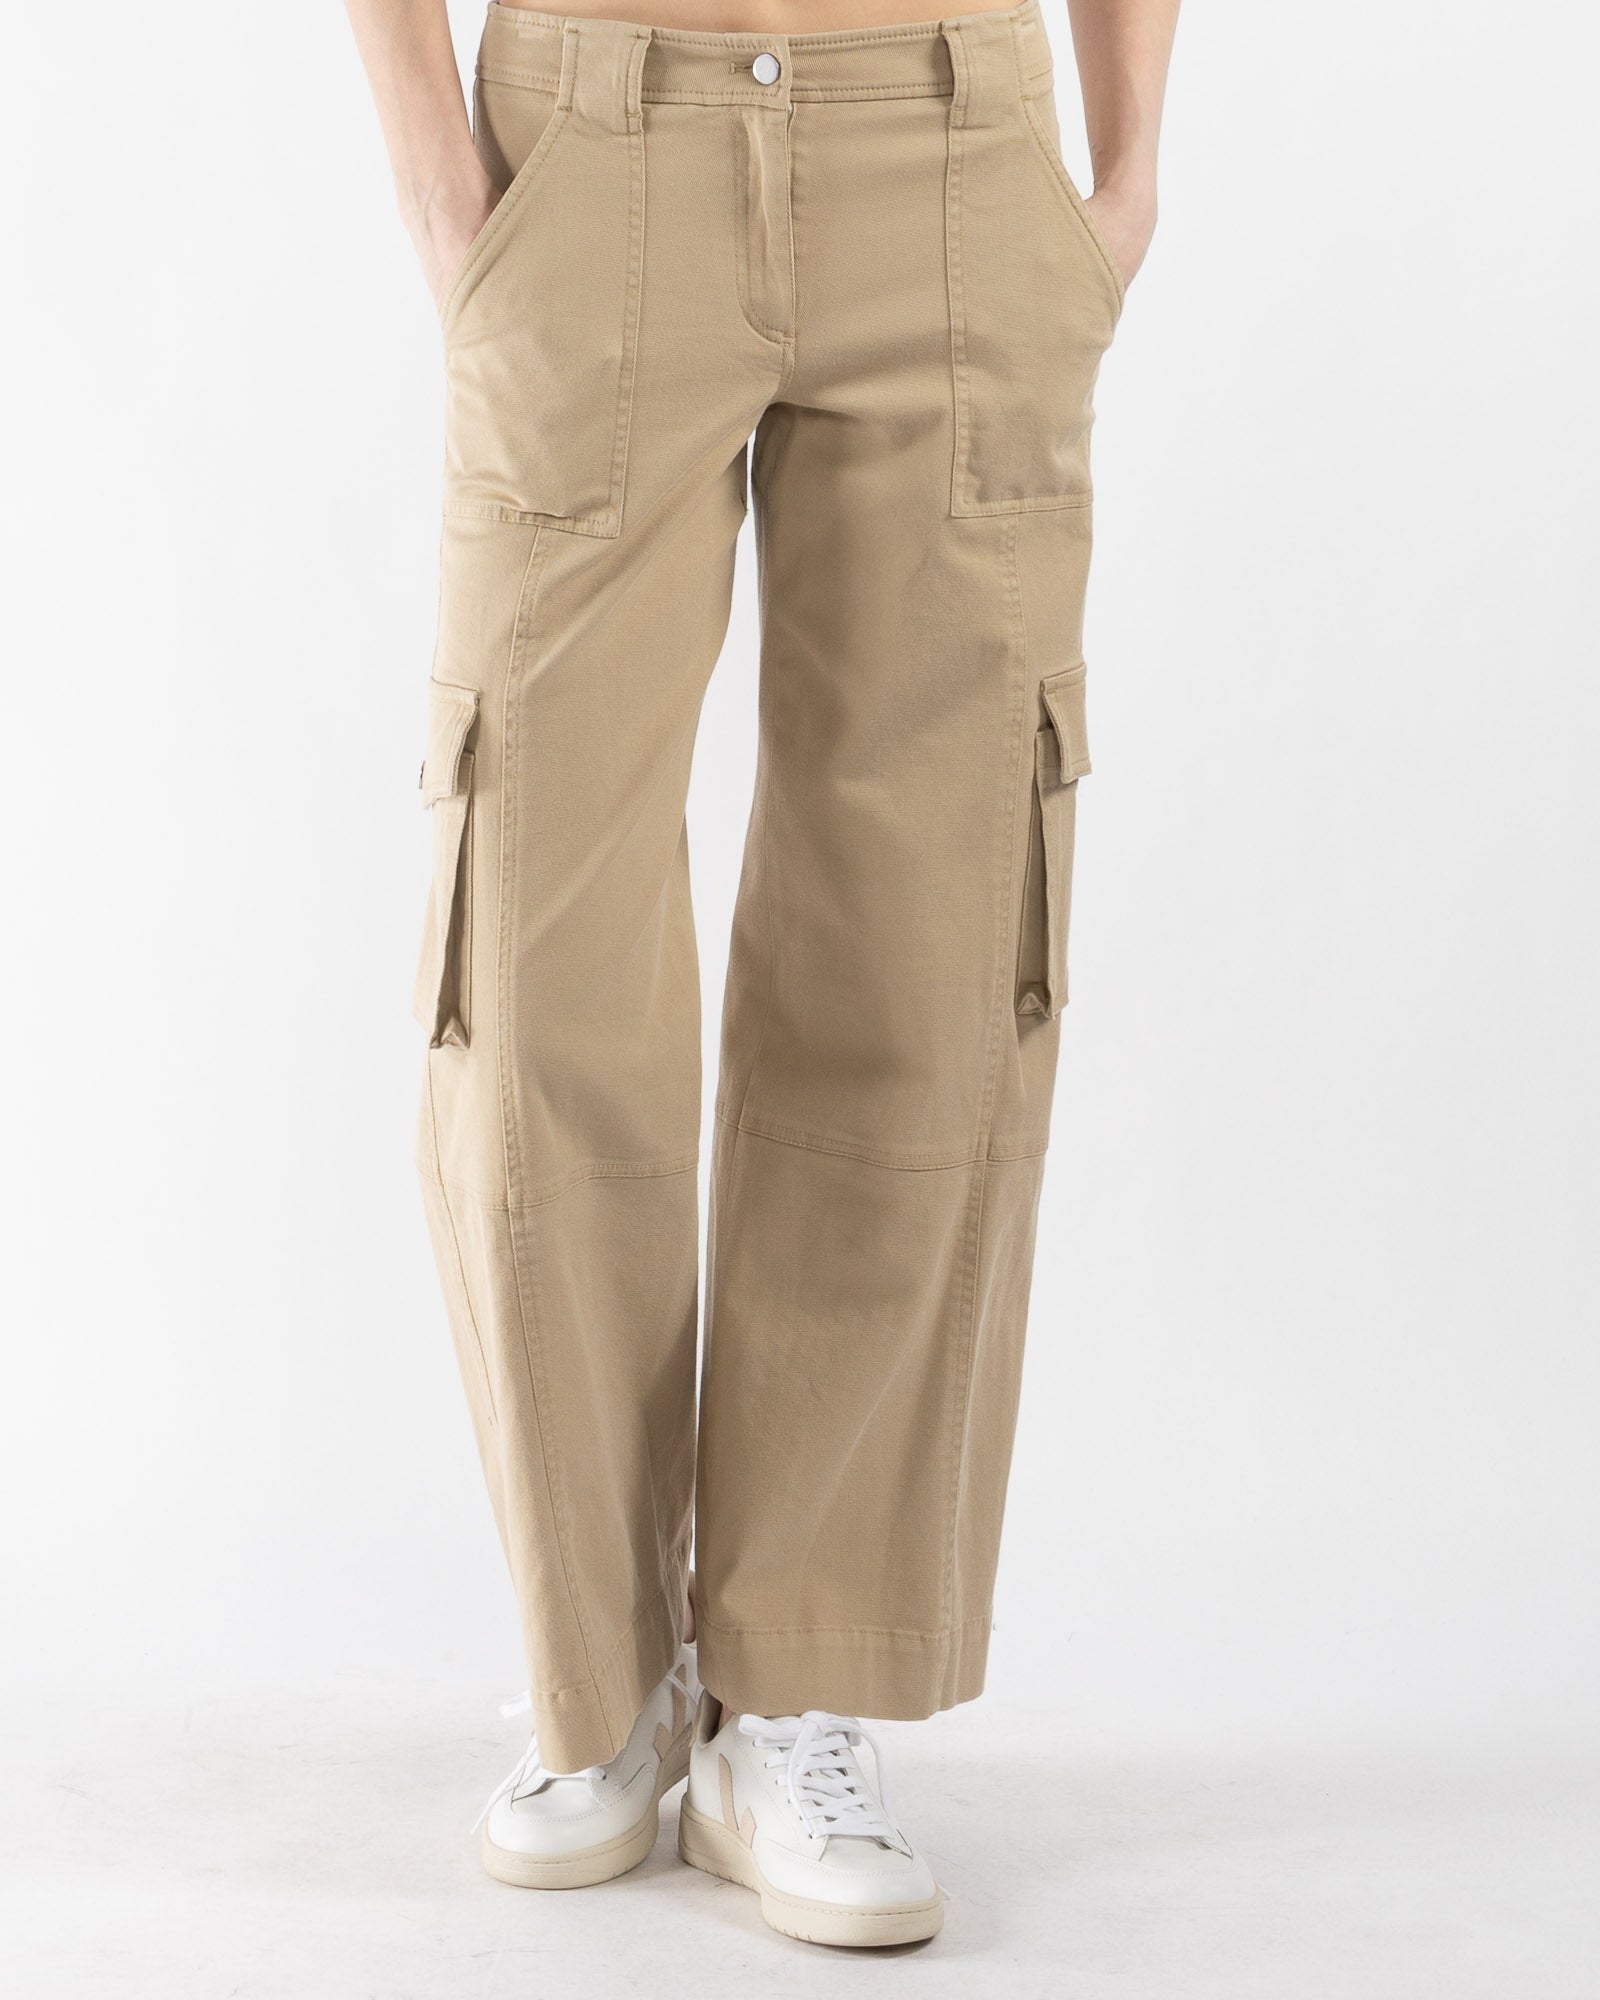 2021 Multi Pocket Cargo Pants For Men And Women Fashionable Streetwear And  Casual Jogging Ladies Cargo Trousers Primark With Elastic Waist X0723 From  Mengqiqi02, $11.21